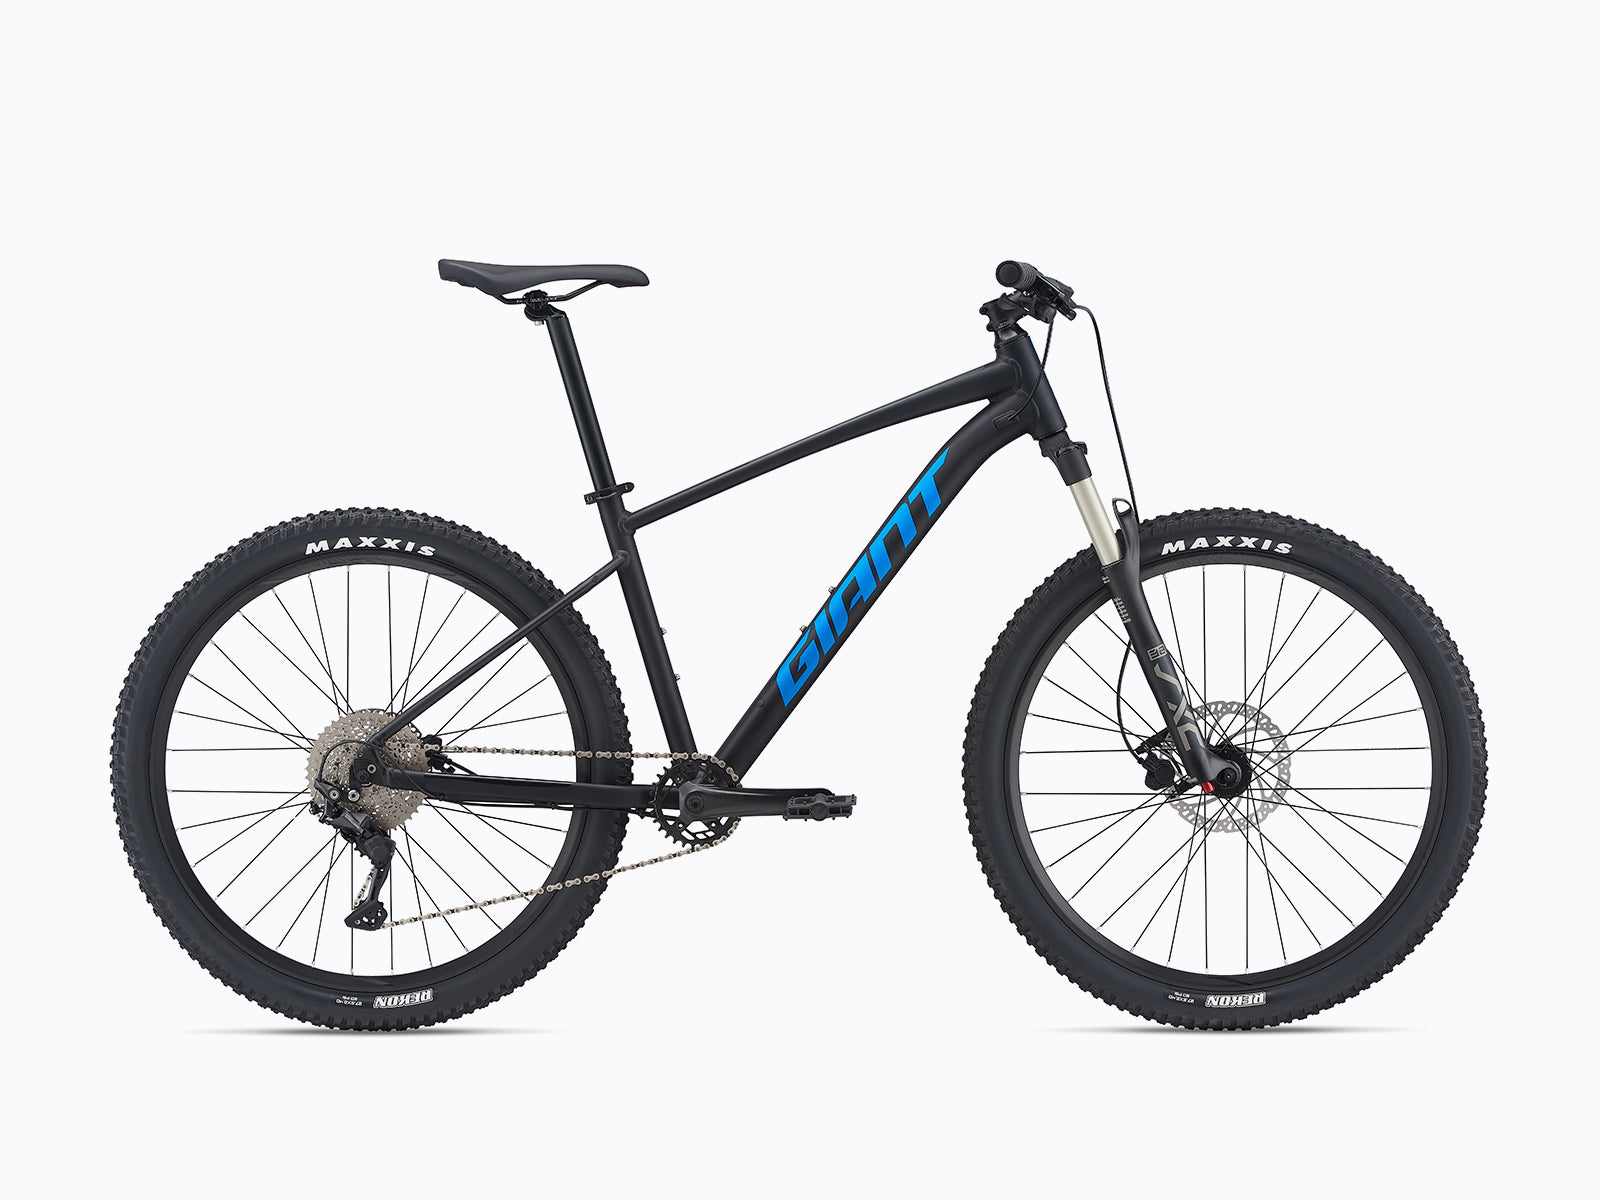 image features the Giant Talon 29 1, a high performance mountain bike in black